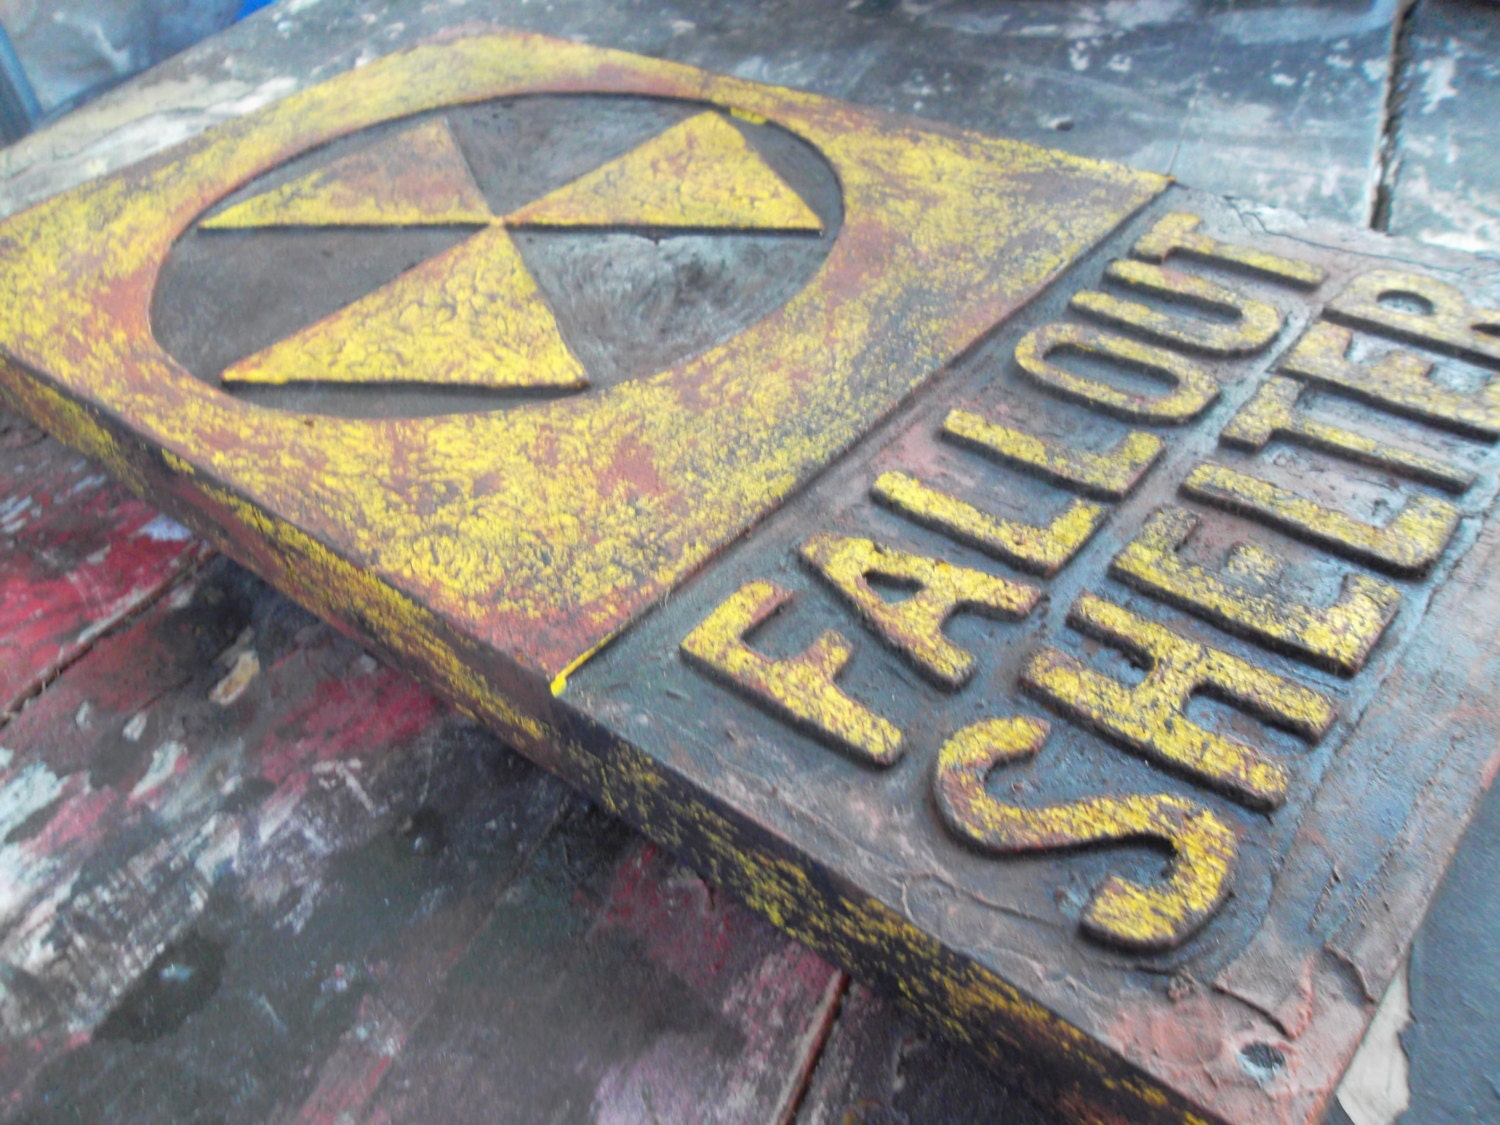 fallout shelter sign images